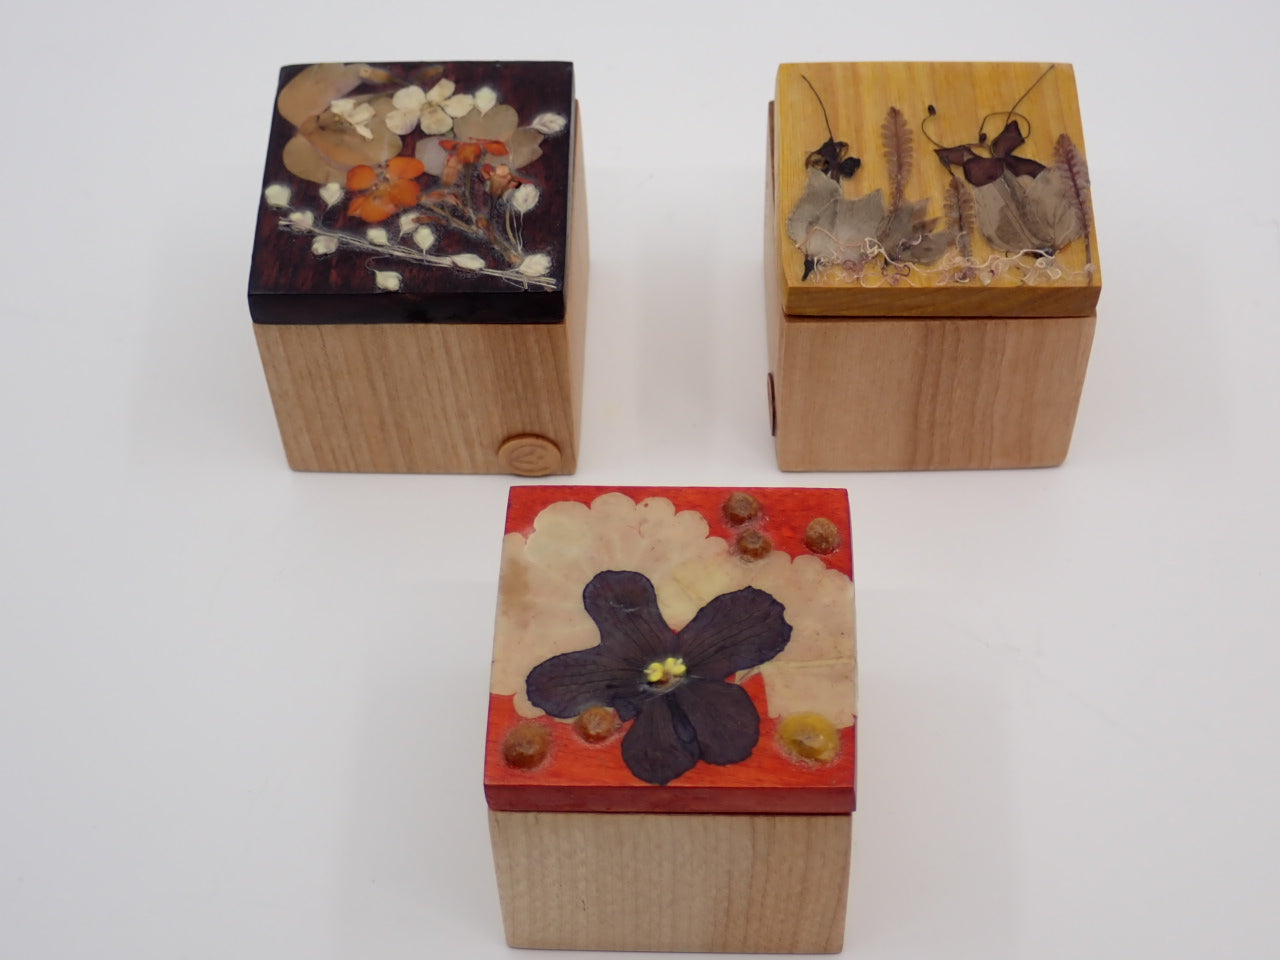 Little Box for a Secret, Wood, Pressed Flowers